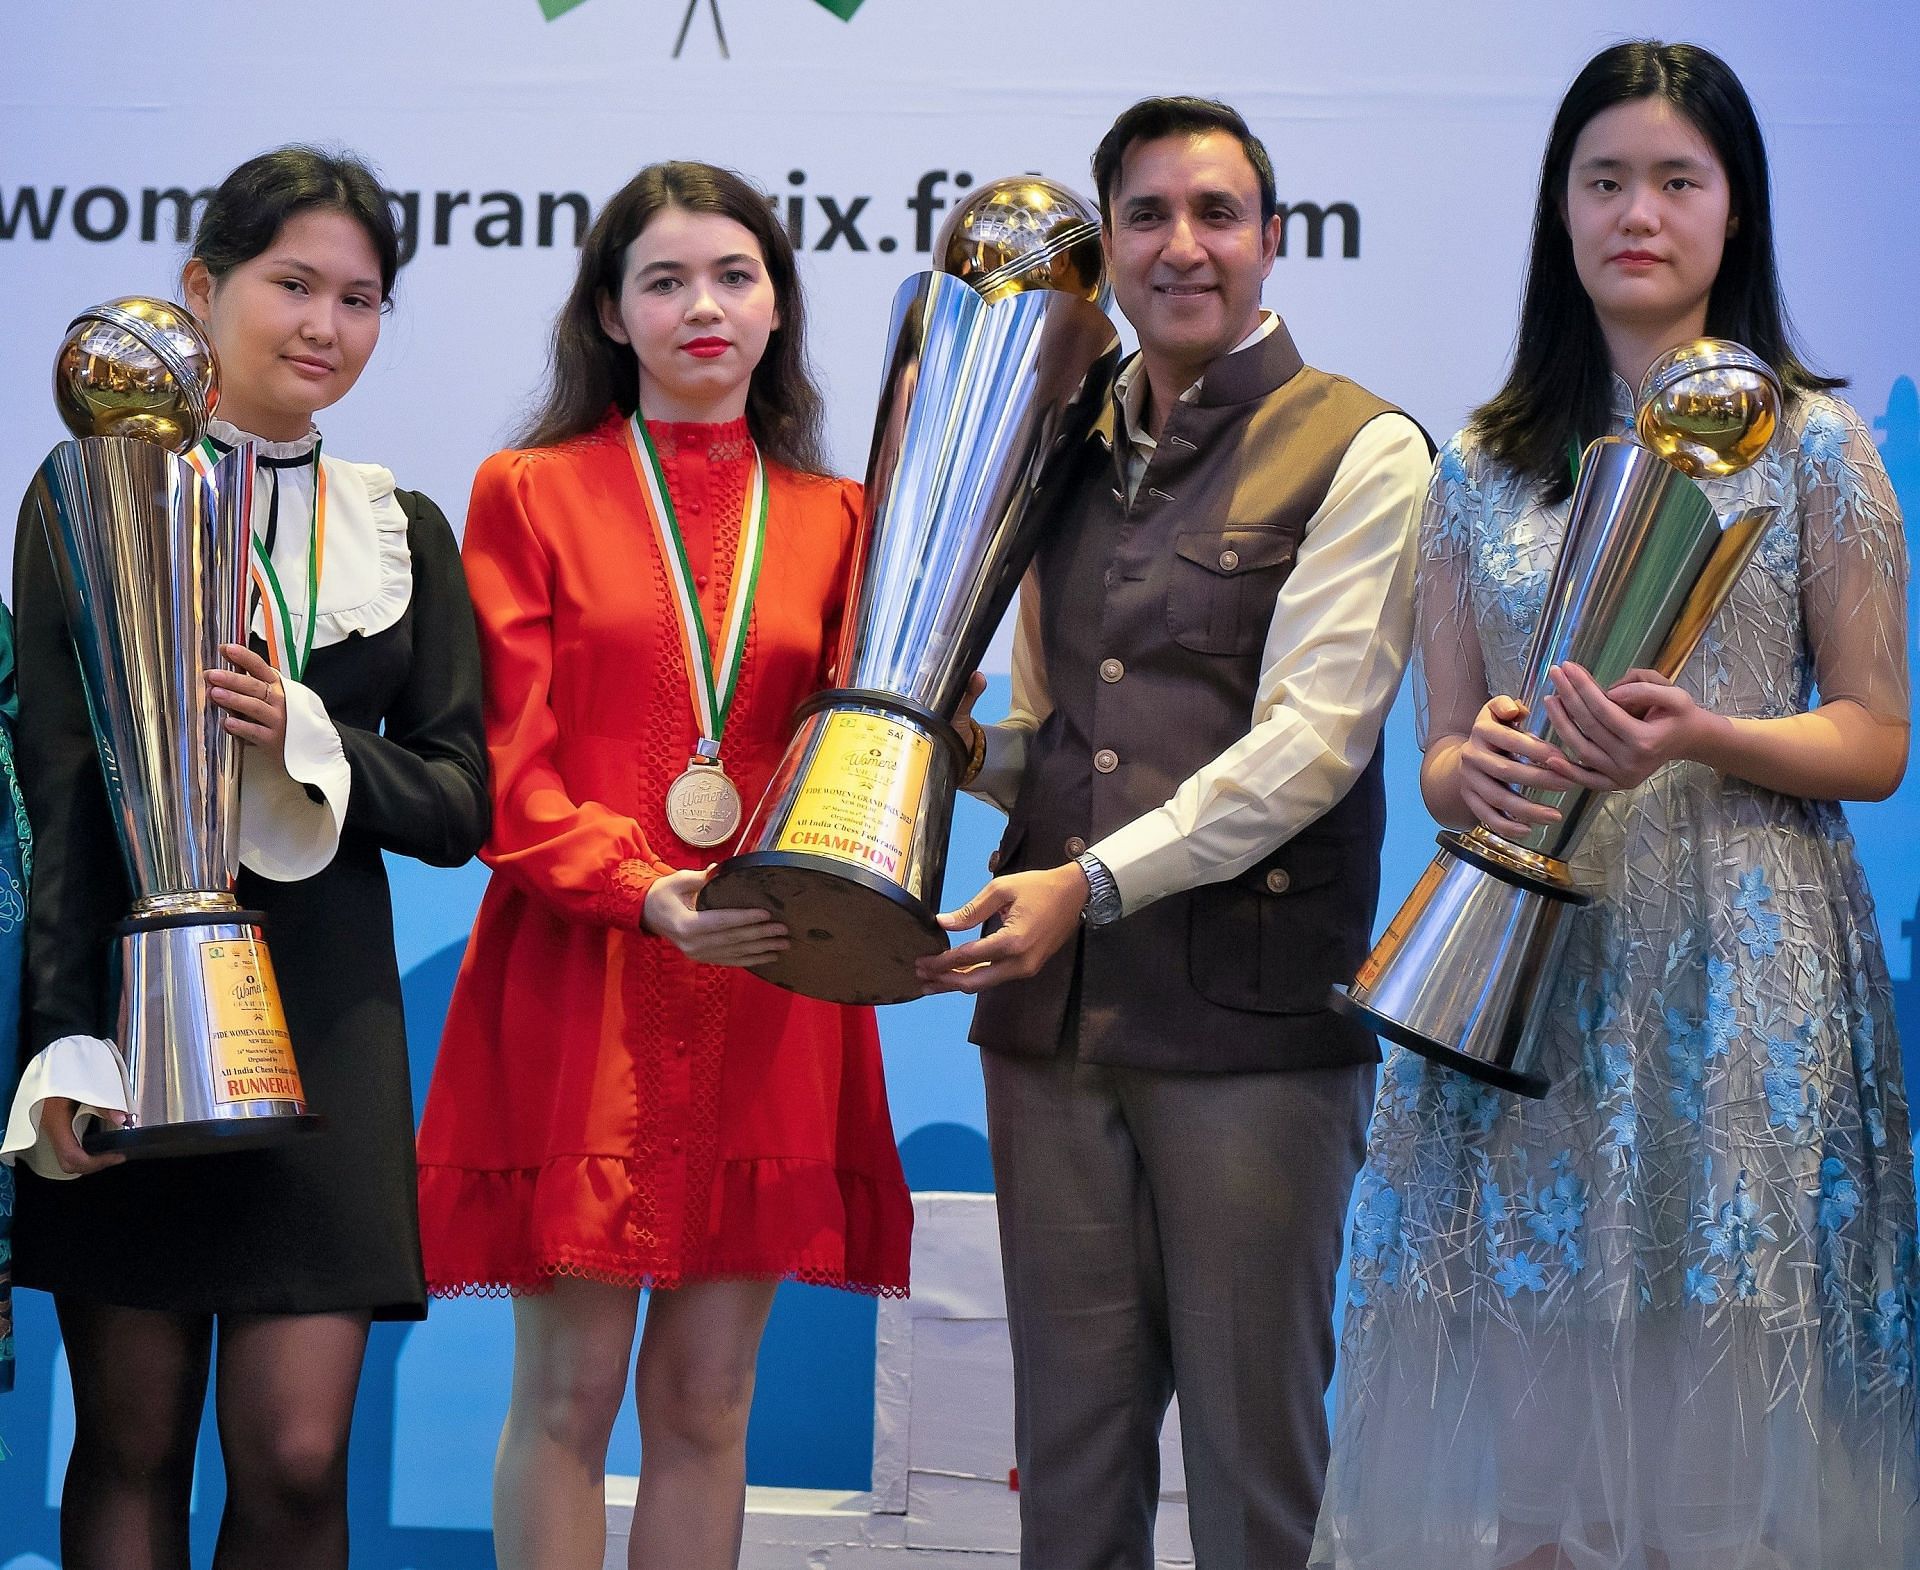 Russia&rsquo;s Alekasandra Goryachkina (second from left) with the trophy at the FIDE Women&rsquo;s Grand Prix in New Delhi. Photo credit: AICF